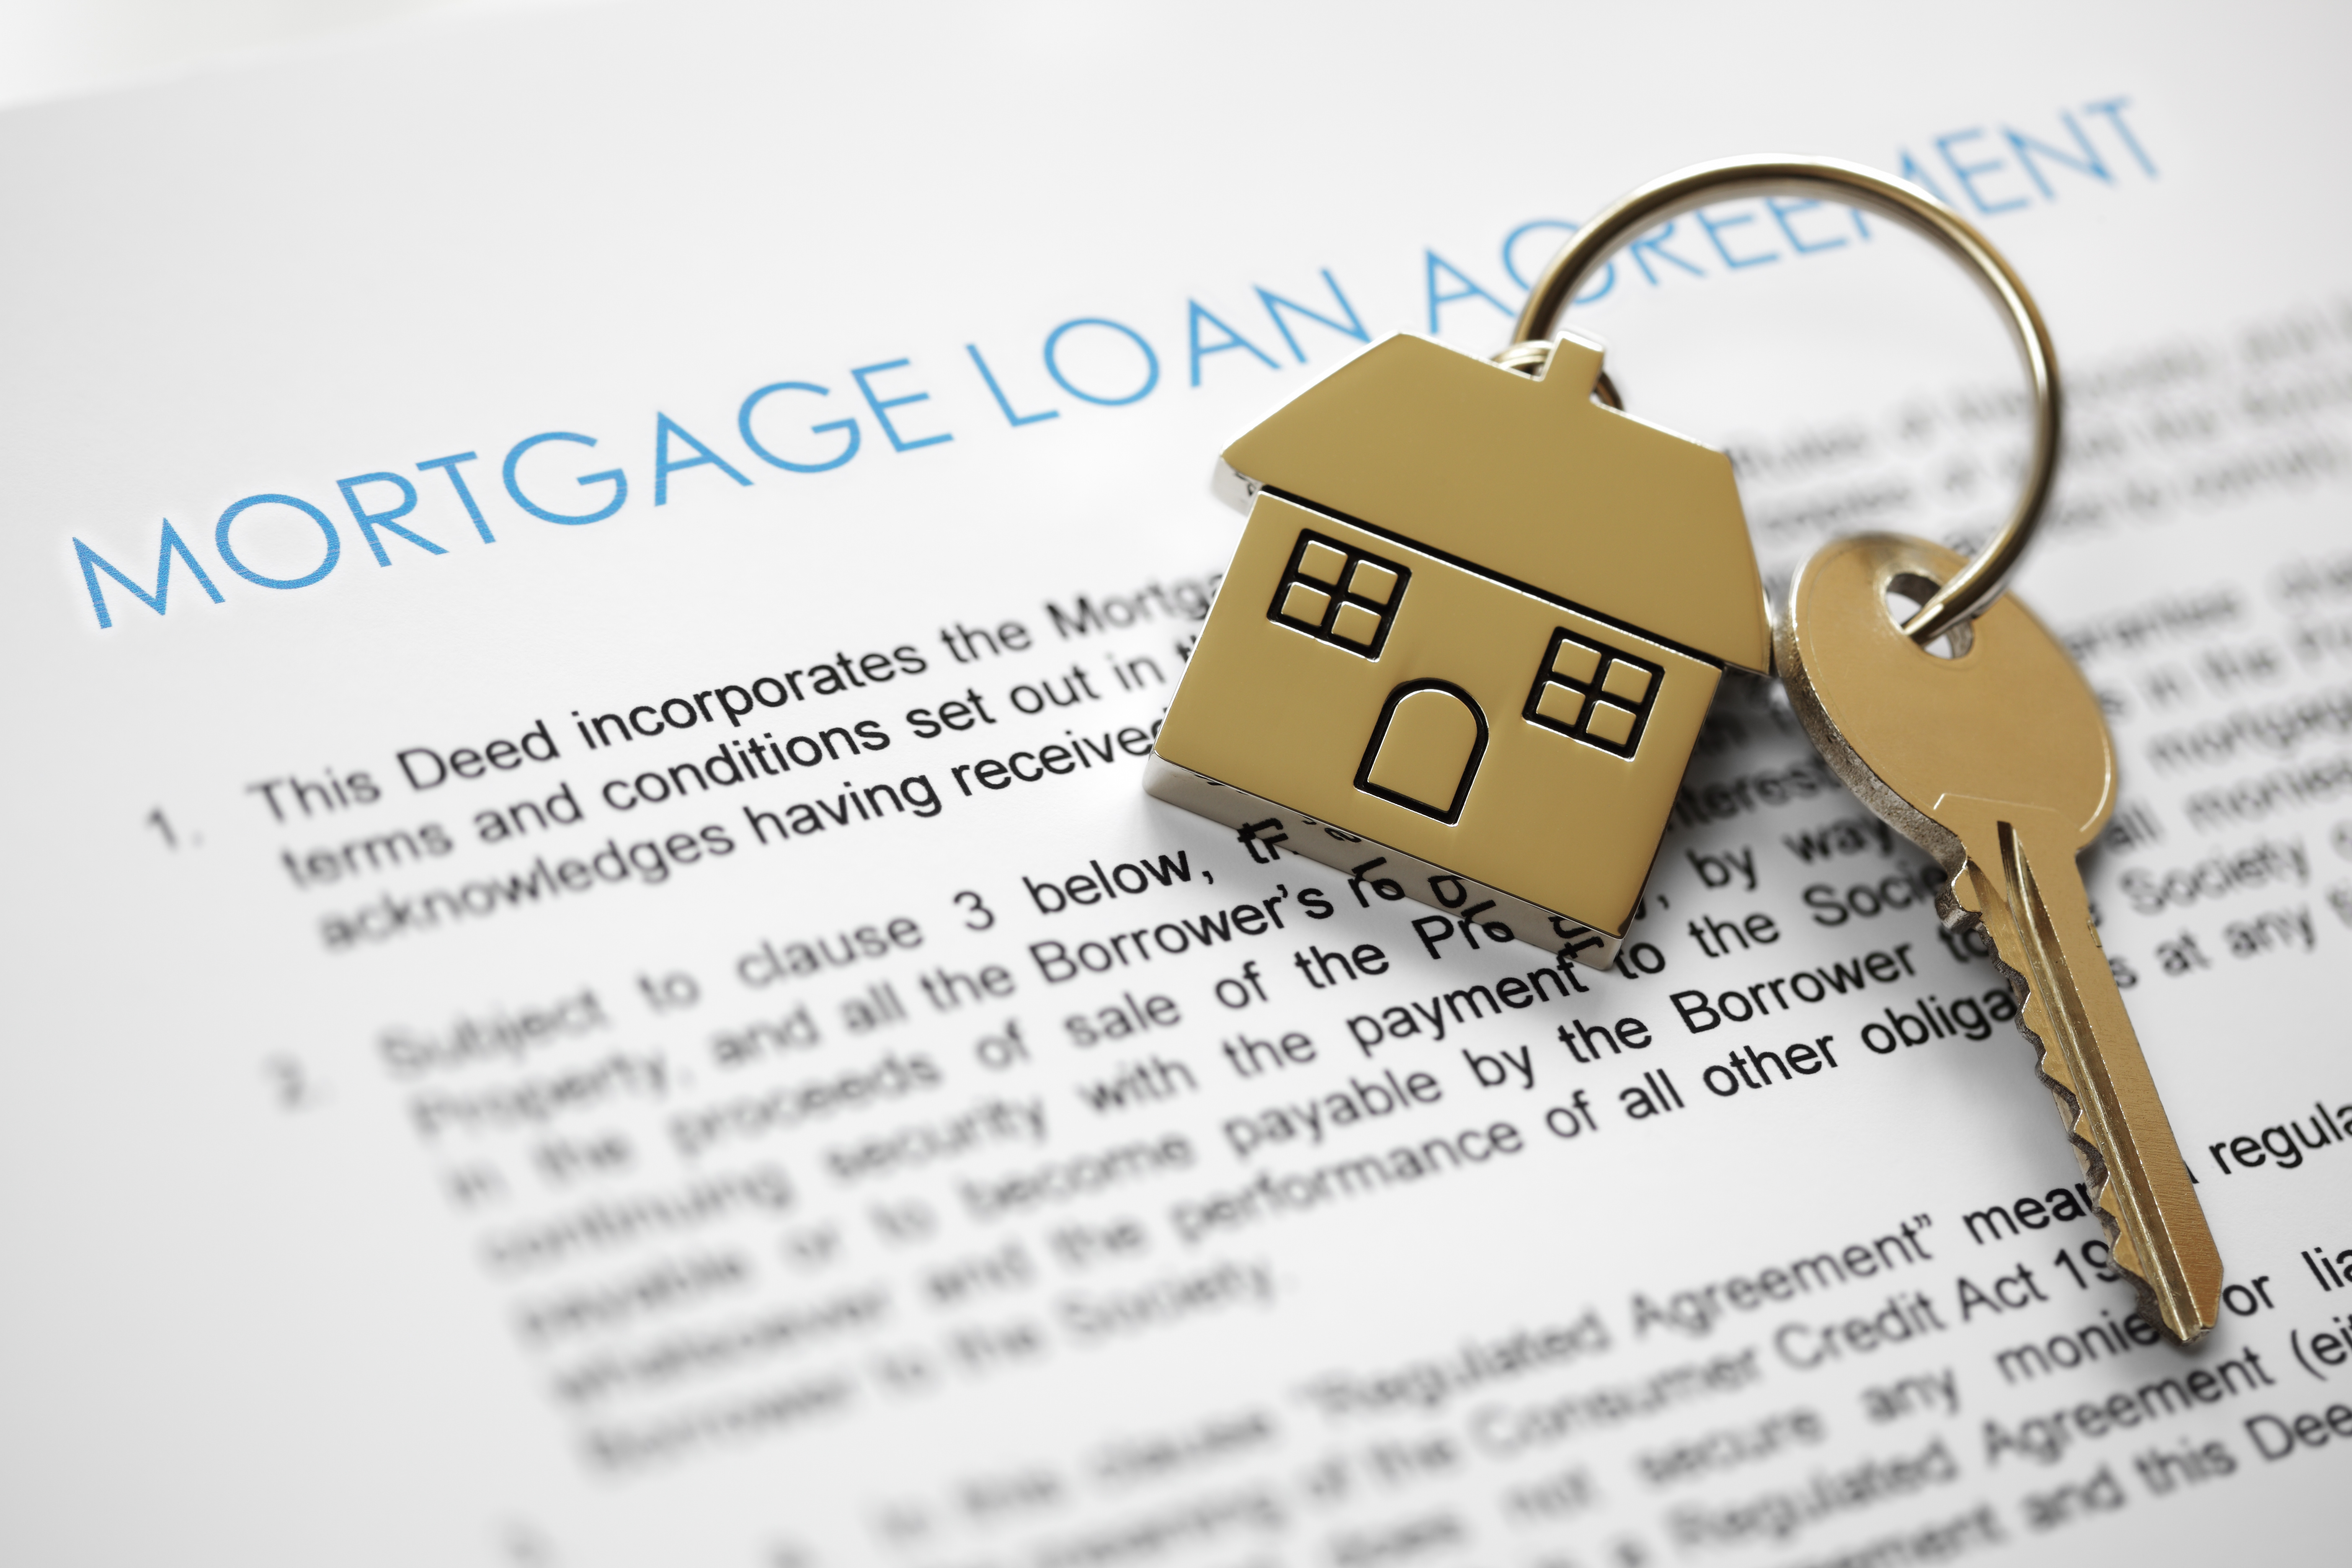 Switching your mortgage doesn’t have to be scary…